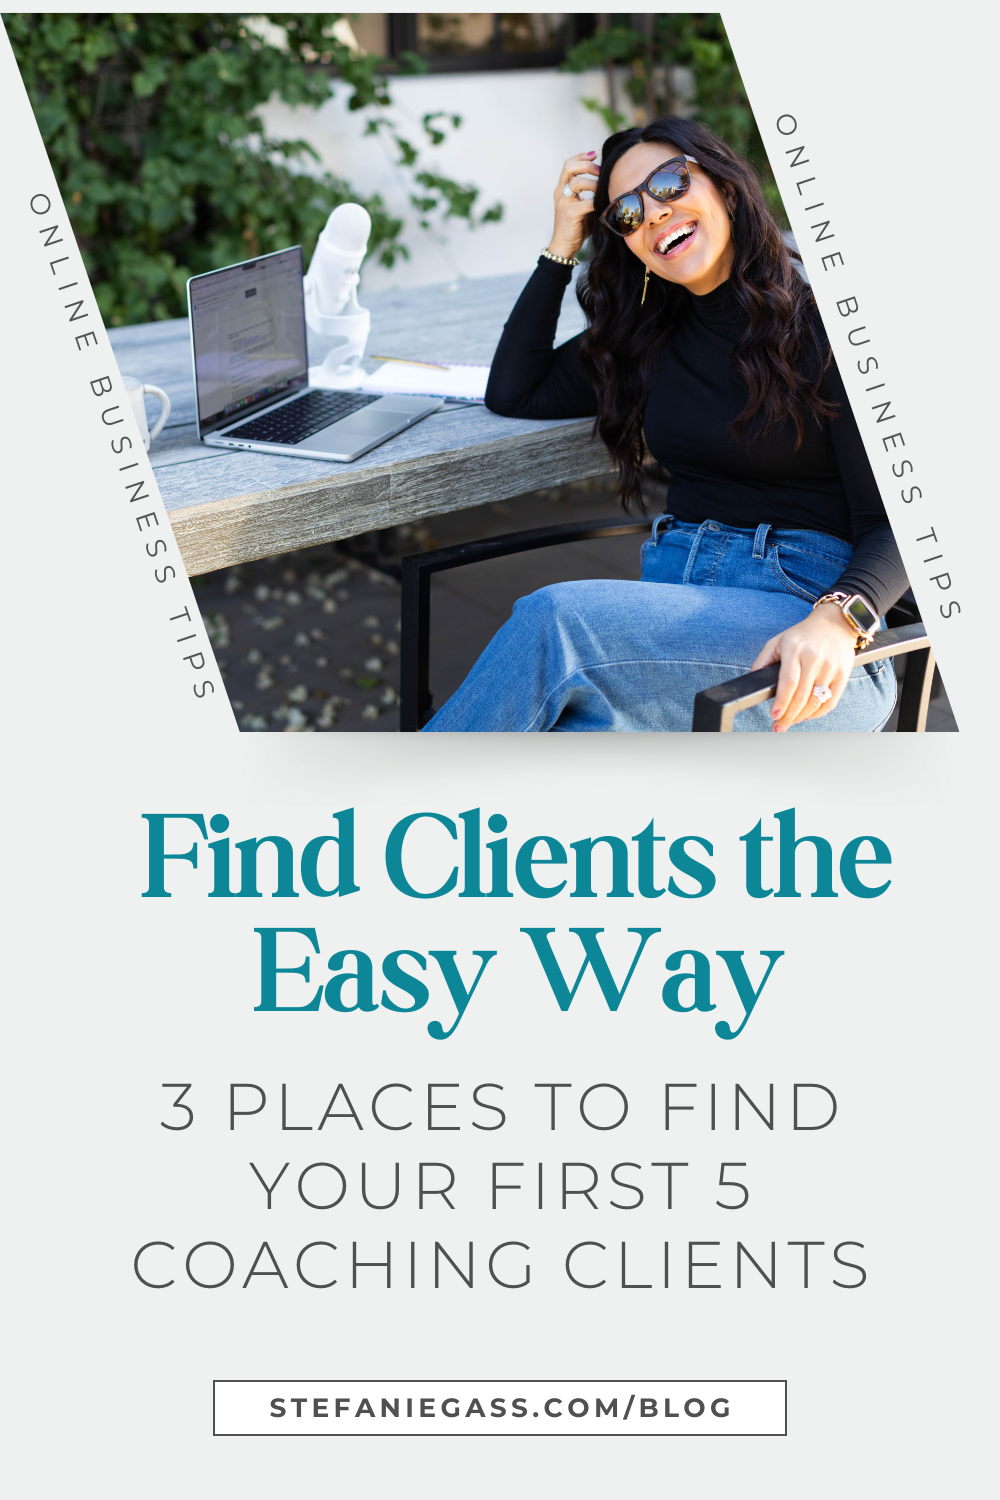 Image of a smiling dark haired woman. Text says " Find clients the easy way. 3 places to find your first 5 coaching clients." 